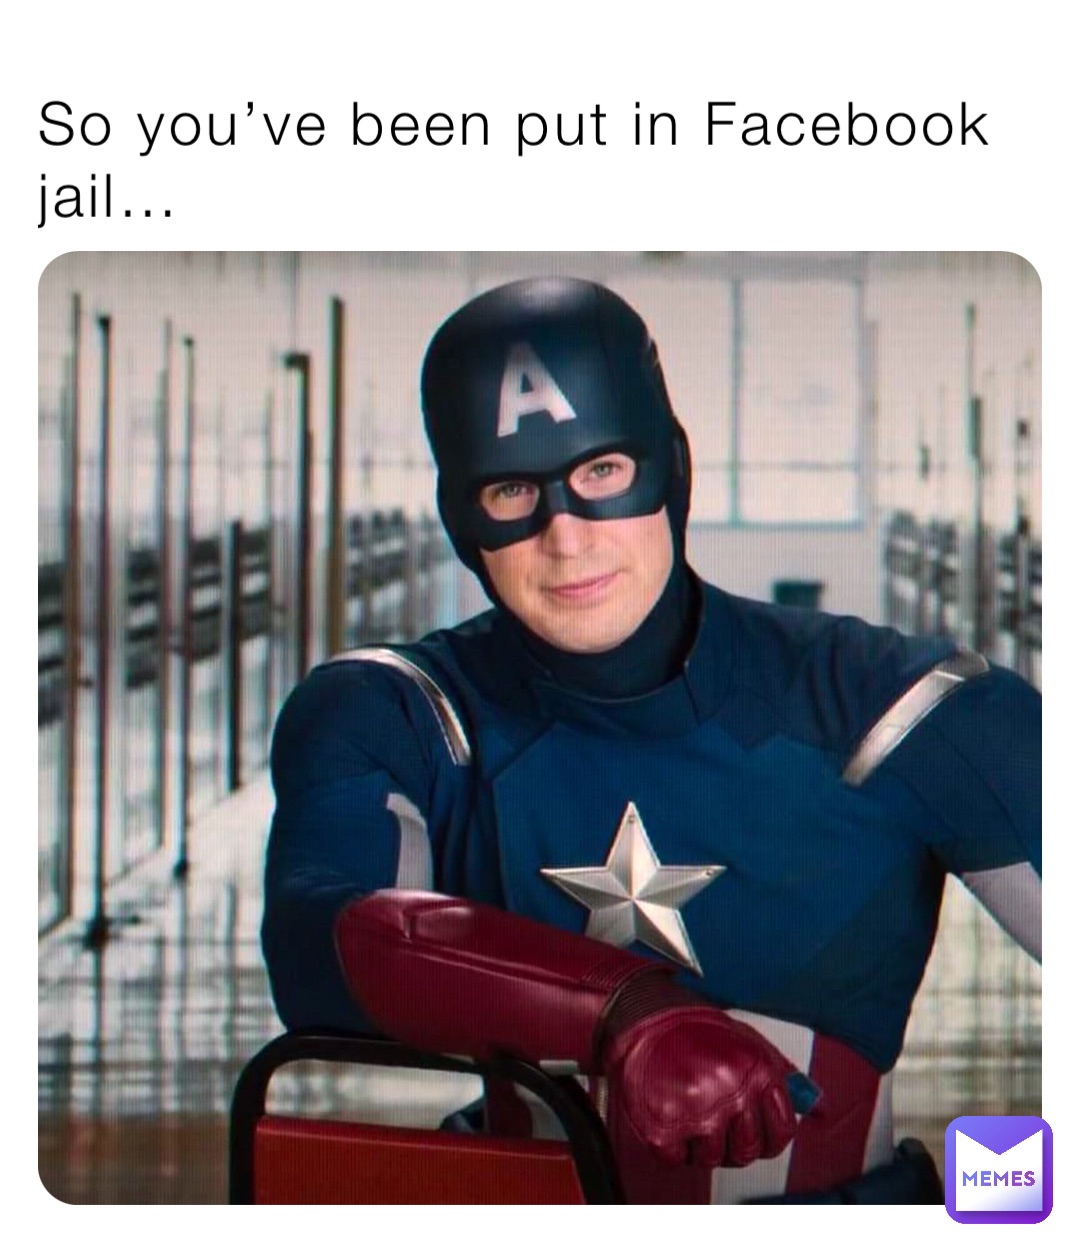 So you’ve been put in Facebook jail…